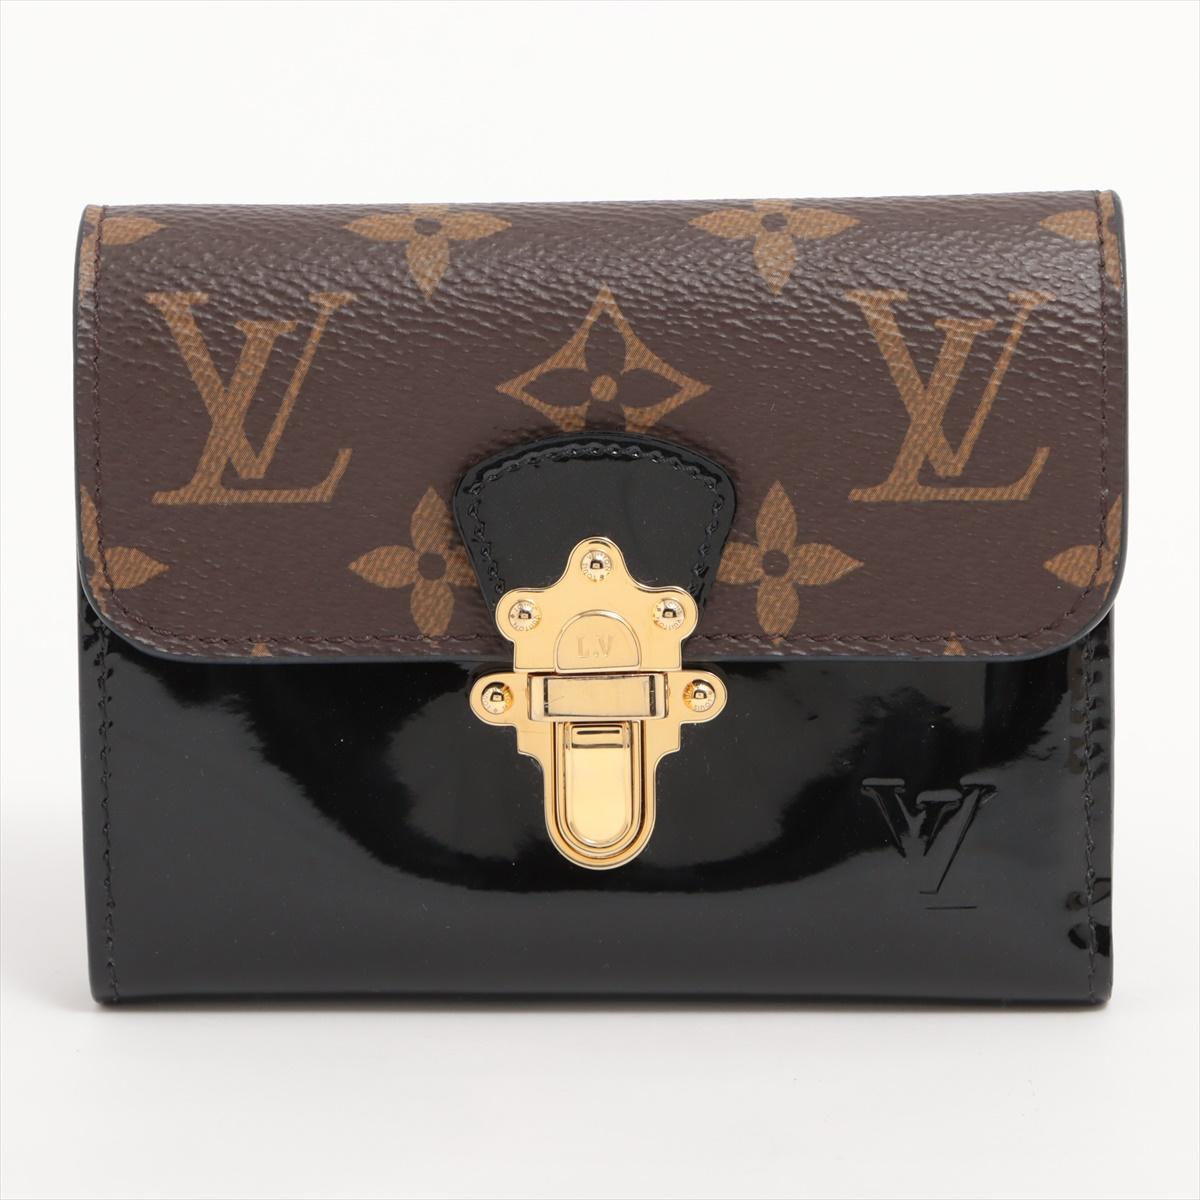 The Louis Vuitton Monogram Vernis S-Lock Short Wallet in Cherry Wood is a luxurious and chic accessory that effortlessly combines elegance with practicality. Crafted from a combination of Monogram Vernis patent leather and smooth leather, the wallet